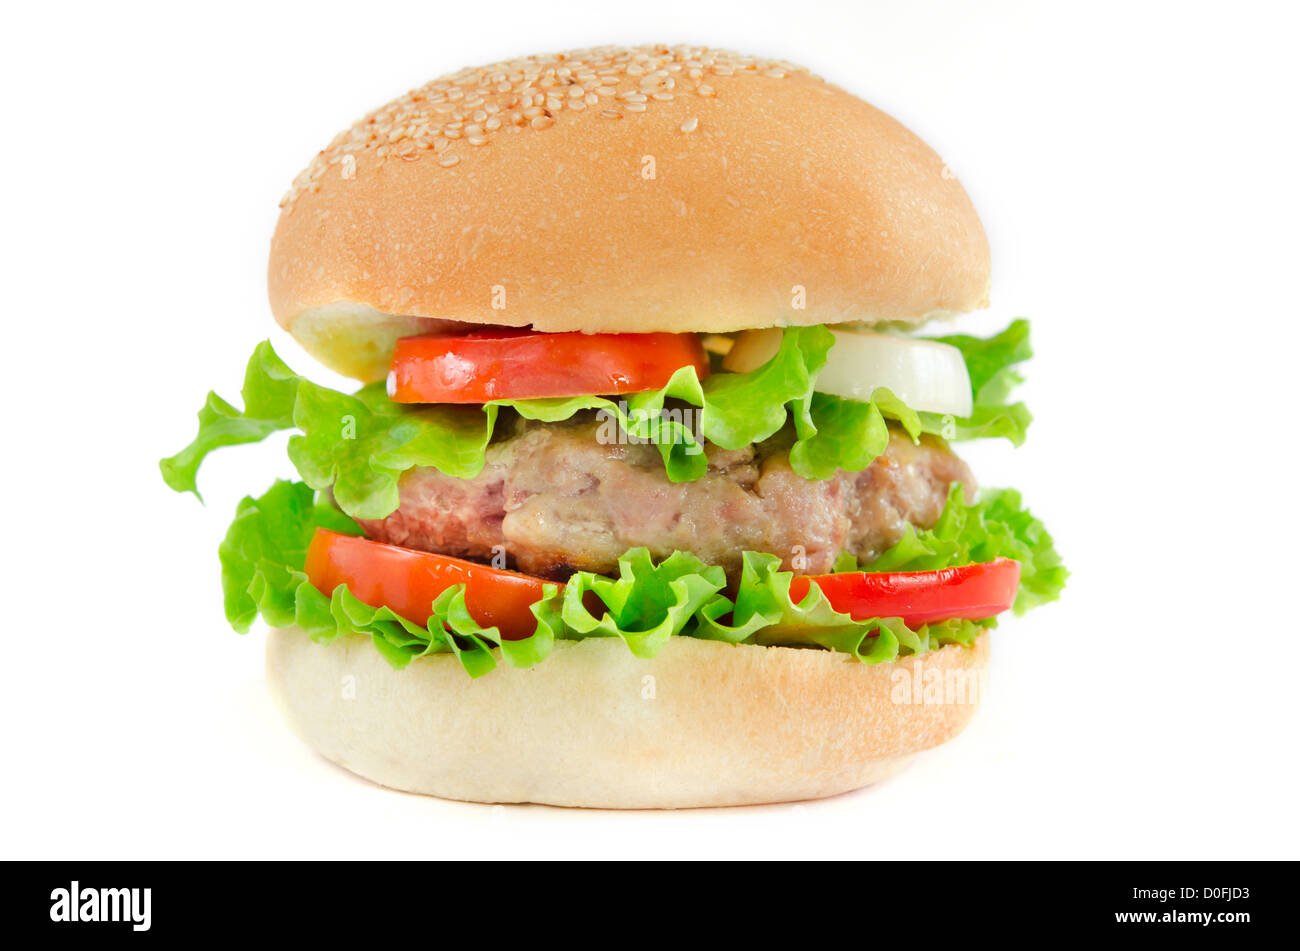 a burger served with pork and vegetable on white background Stock Photo